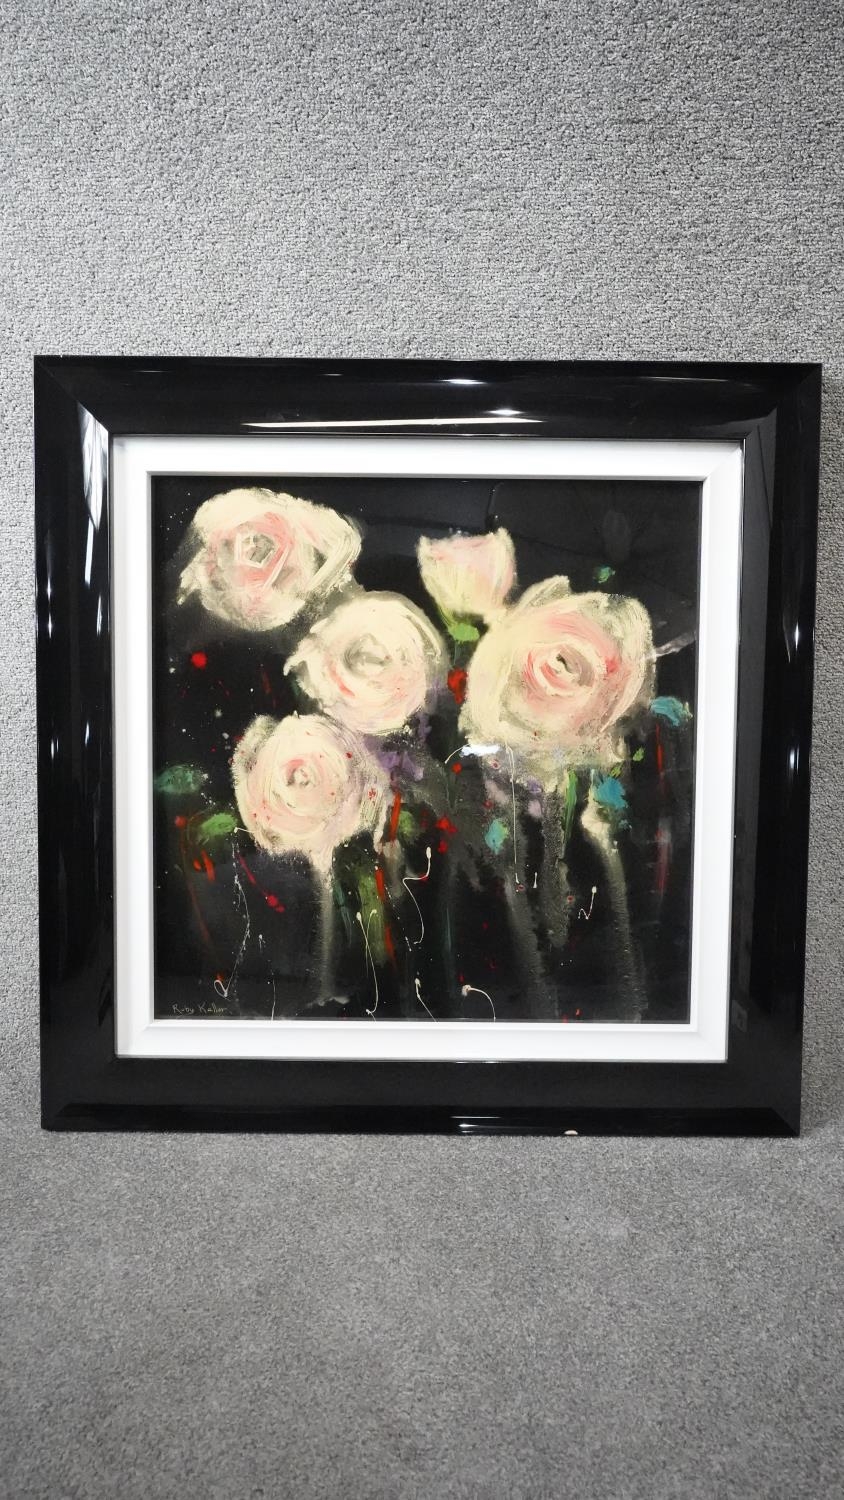 Ruby Keller- A framed and glazed acrylic on board with resin of a group of abstract roses. Signed by